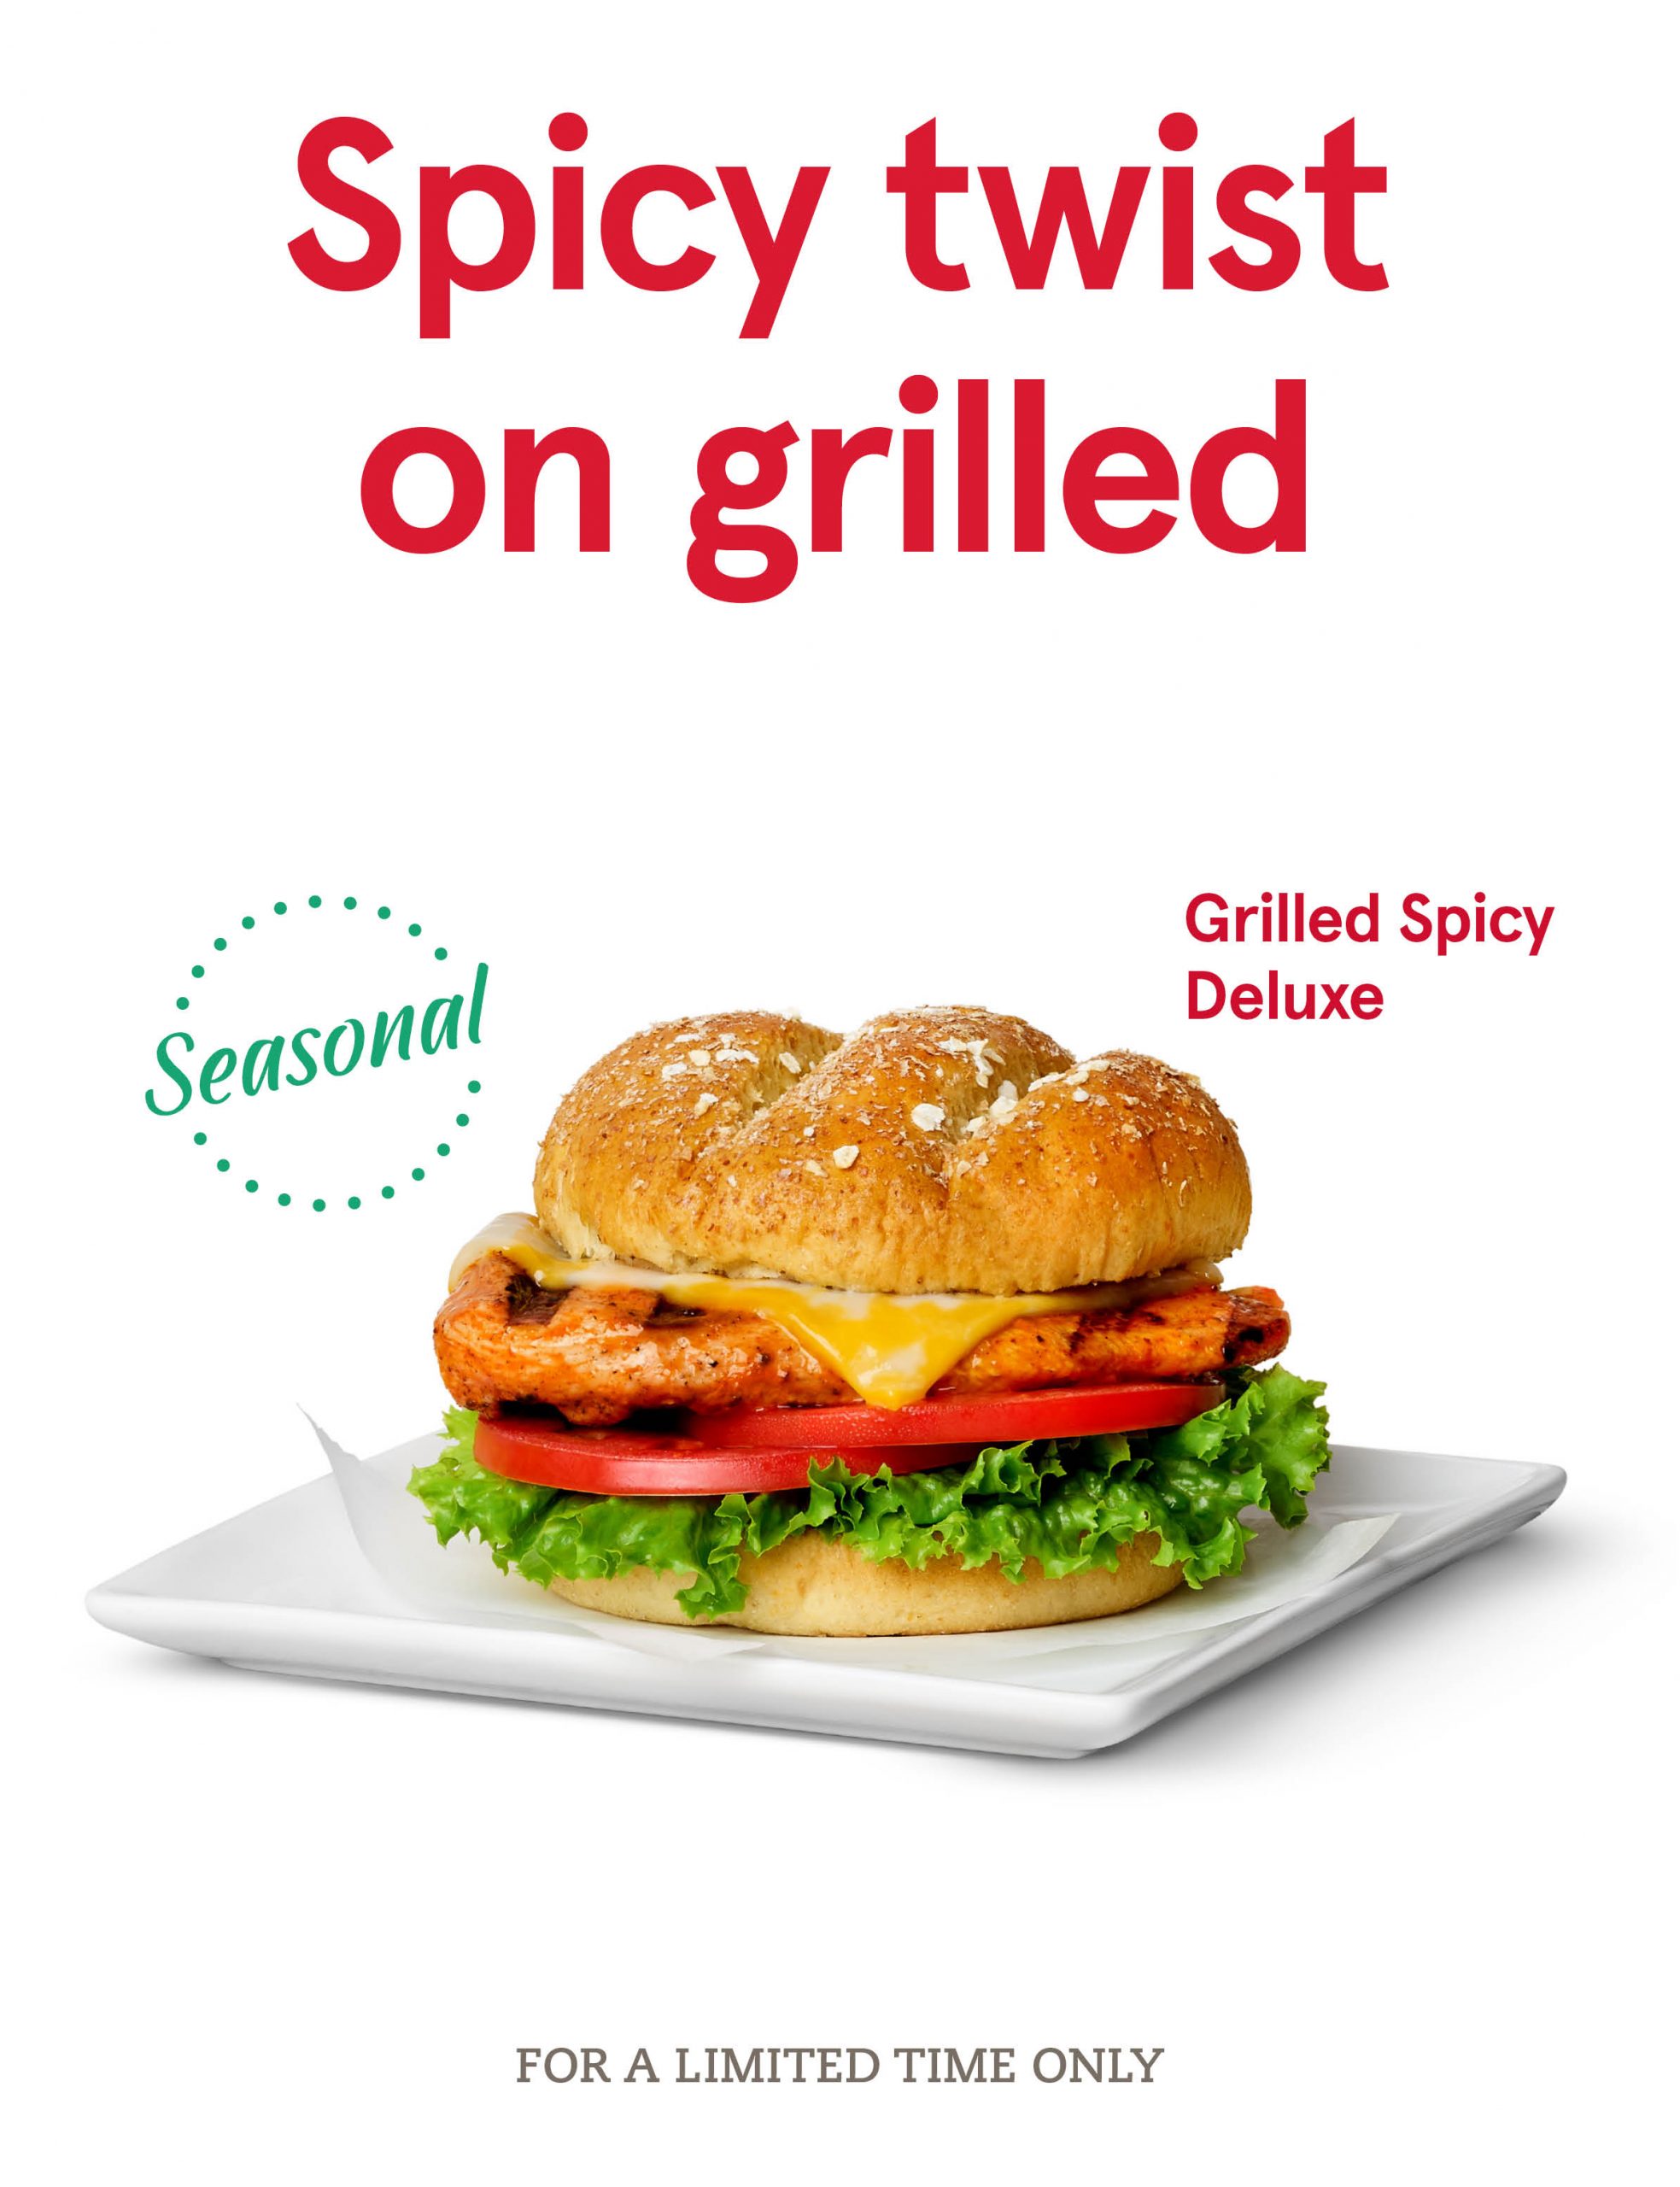 Grilled Spicy Deluxe